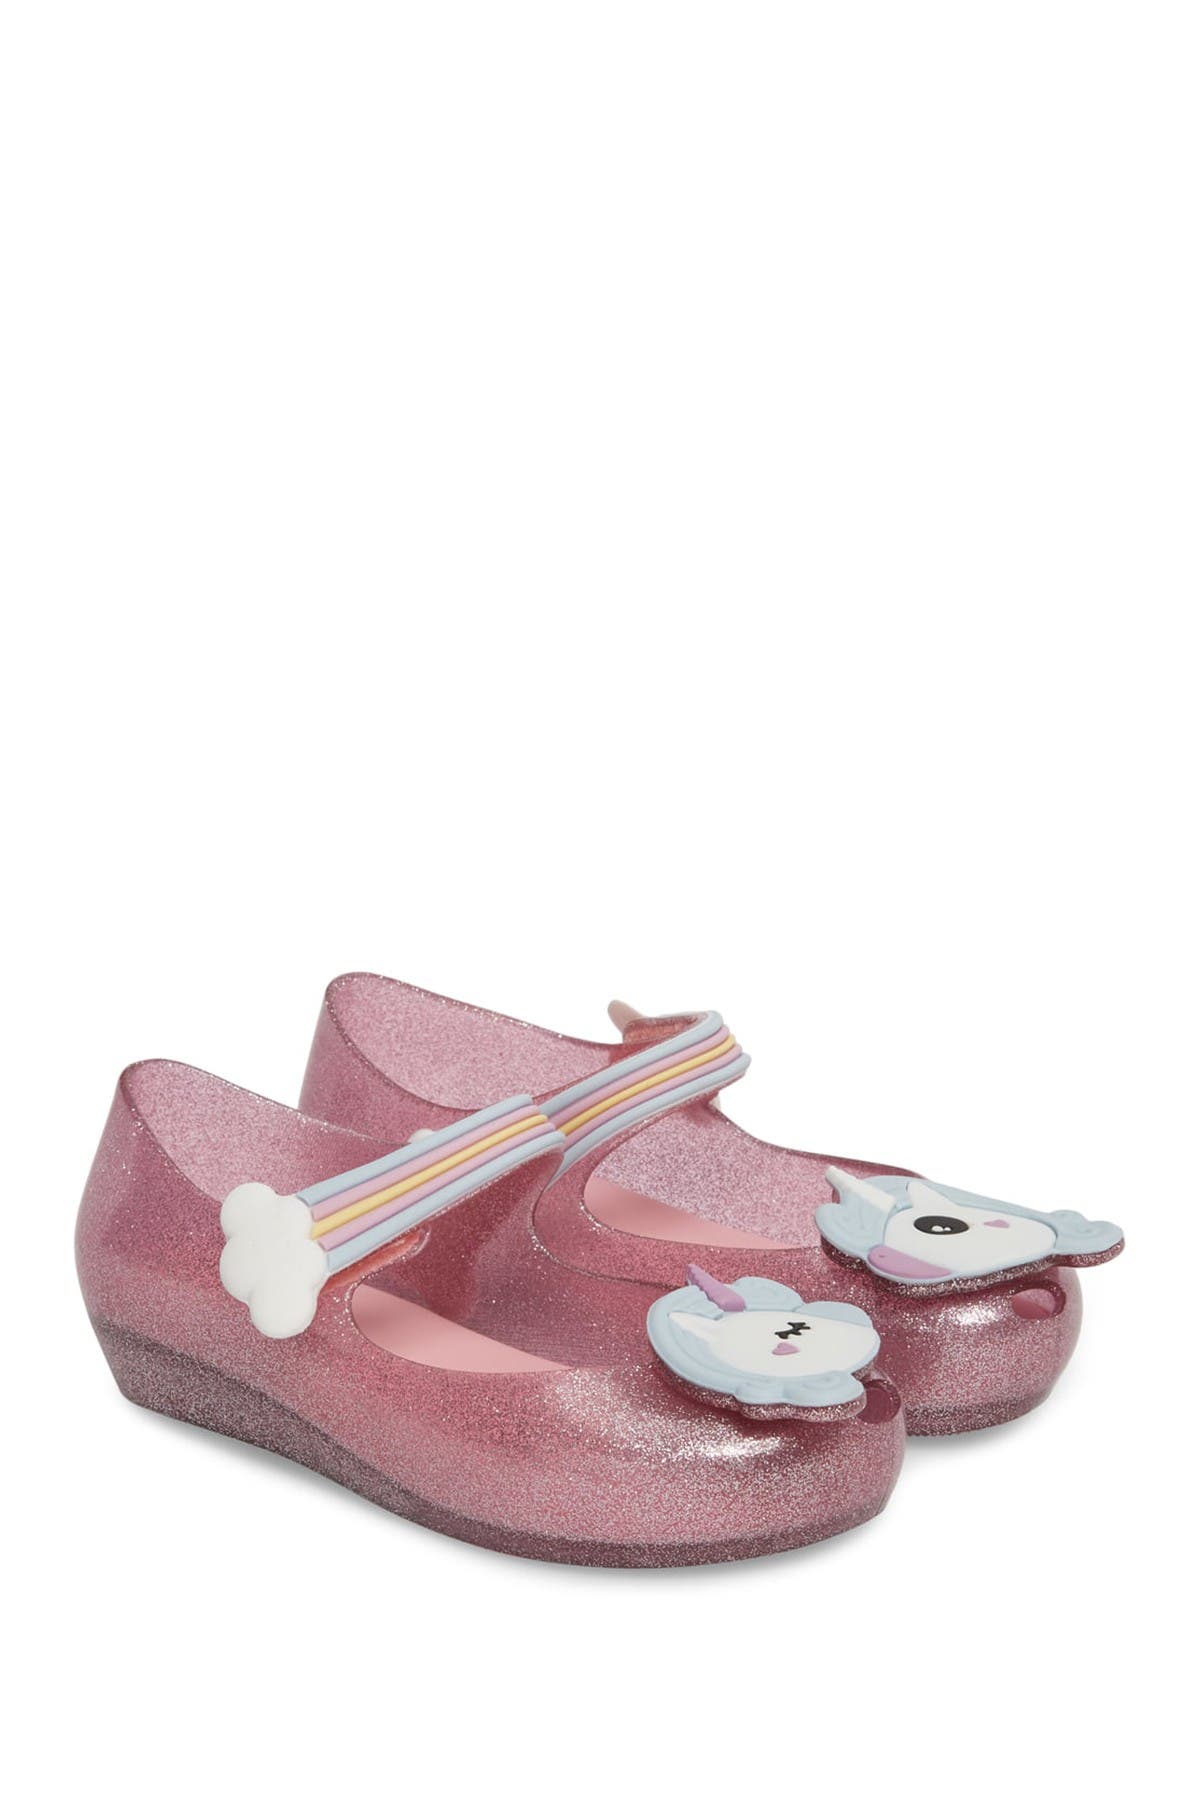 Kids' Girls' Shoes Clearance 